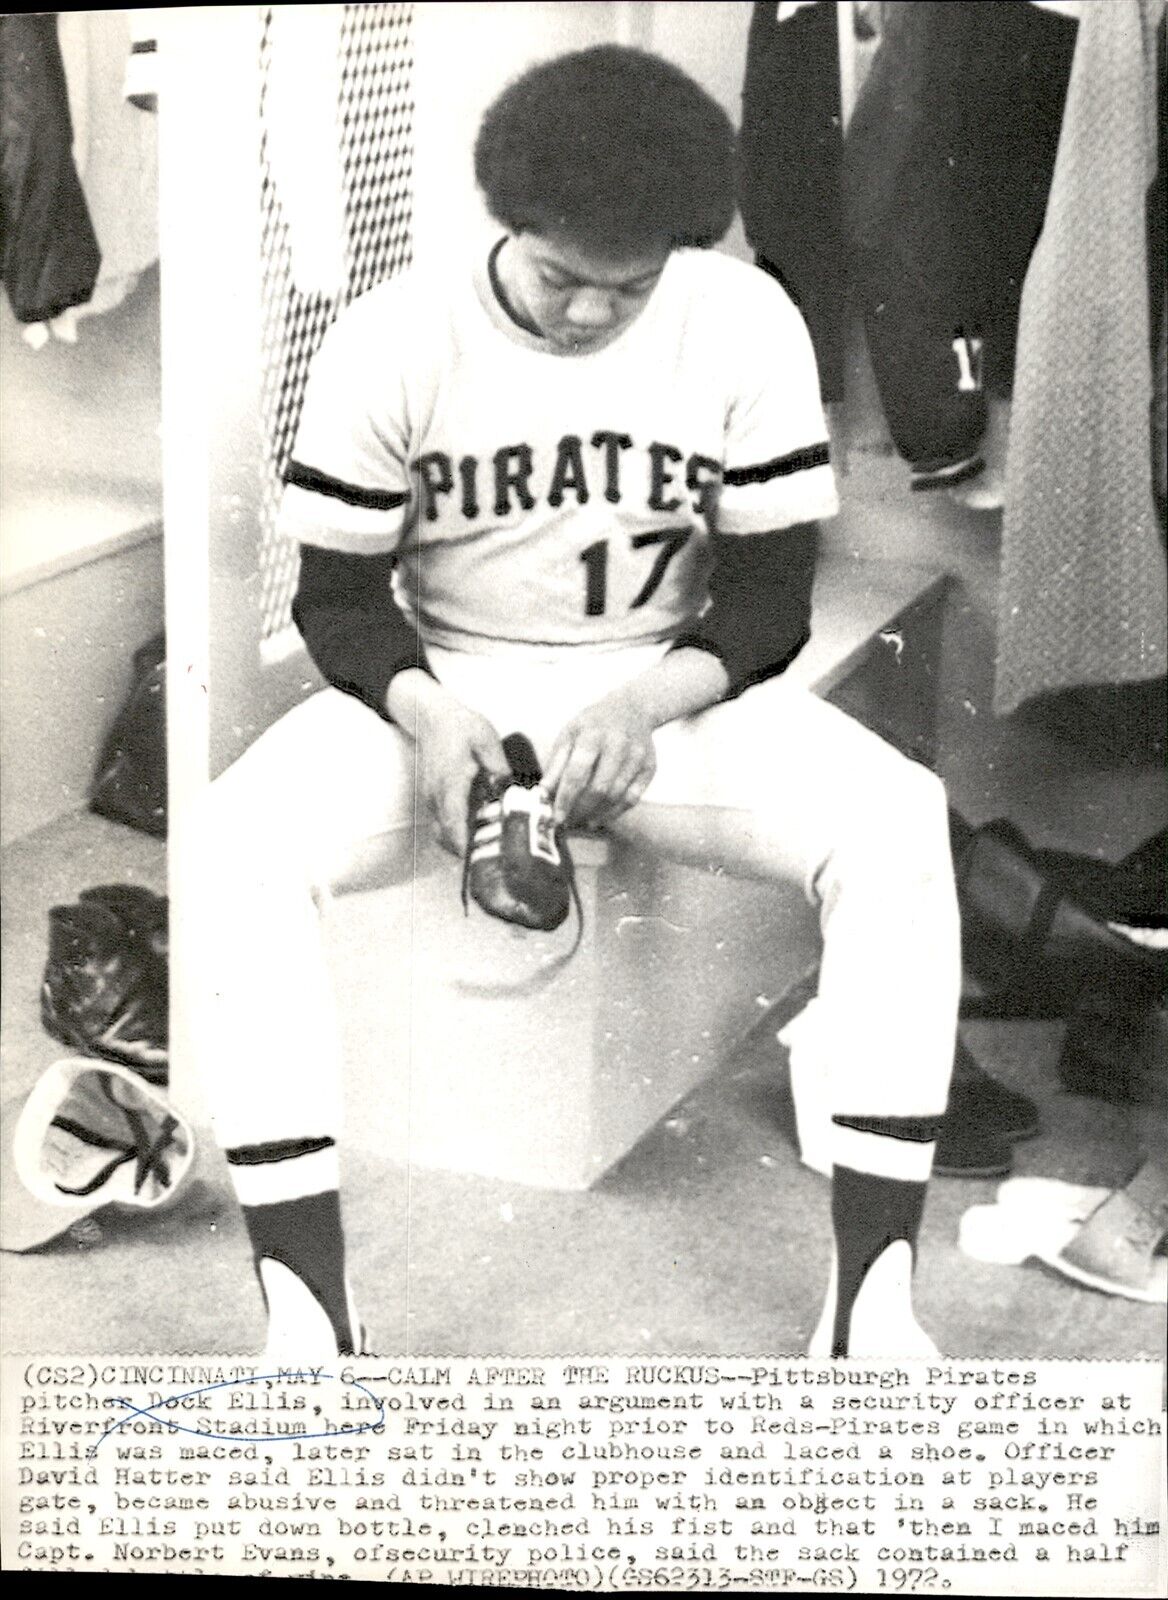 LG968 1972 Wire Photo CALM AFTER THE RUCKUS PITTSBURGH PIRATES DOCK ELLIS MACED